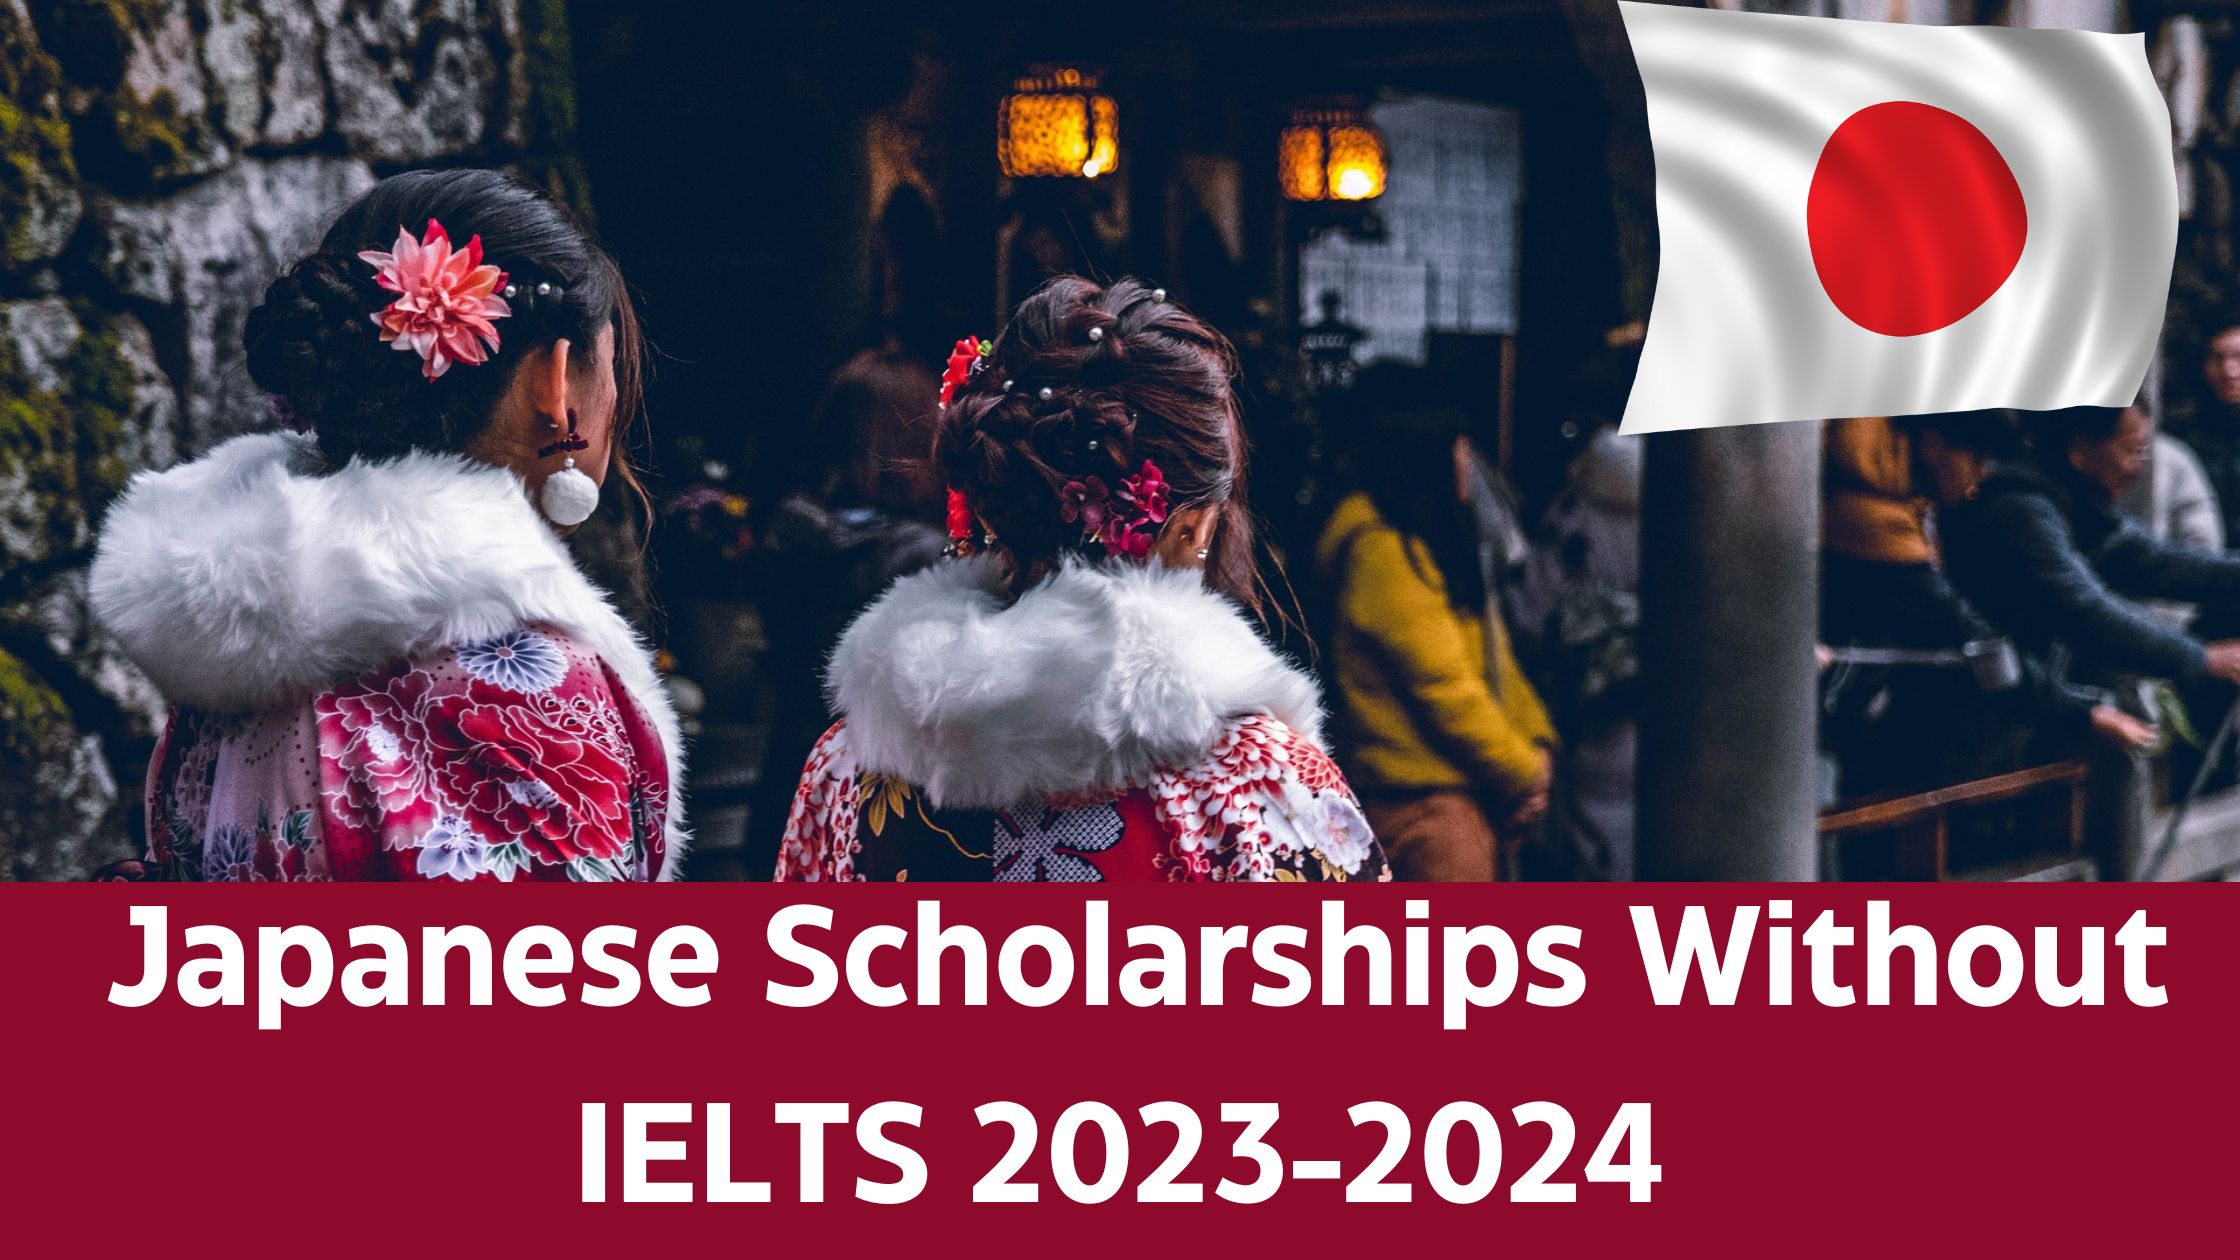 Japanese Scholarships Without IELTS 2023-2024